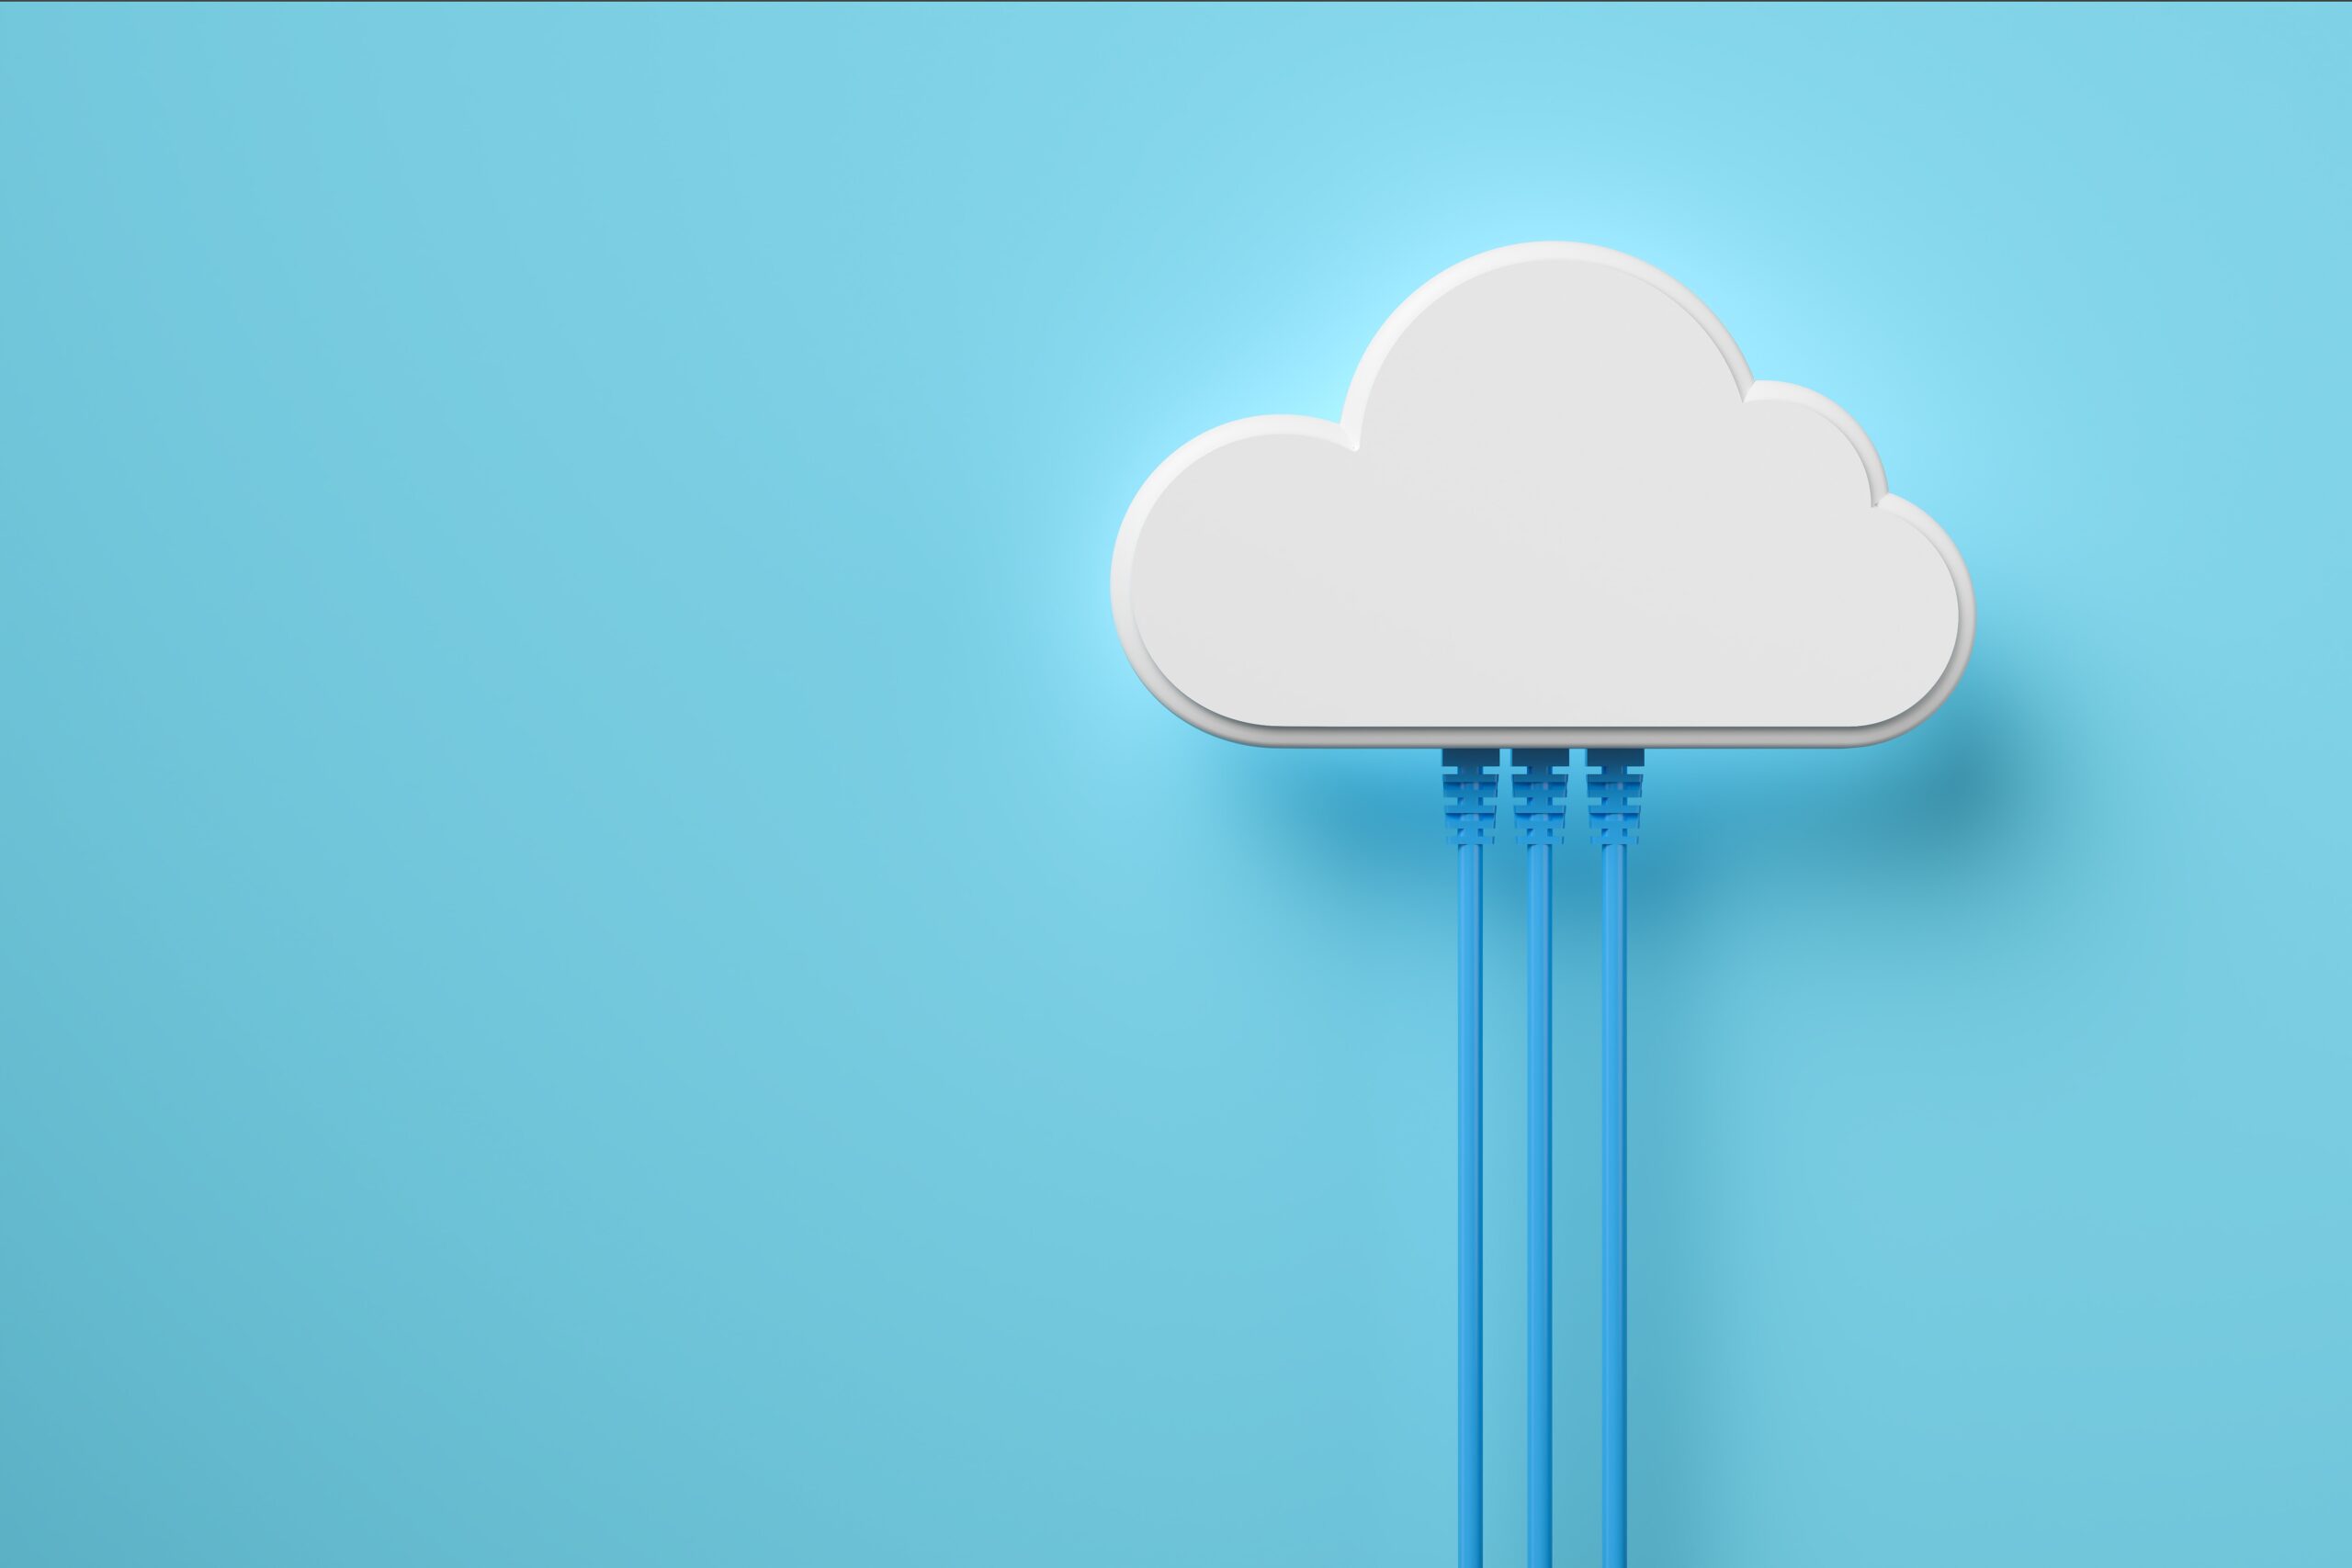 Icon of cloud connected to Ethernet cable symbolizing the benefits of using cloud computing in networking